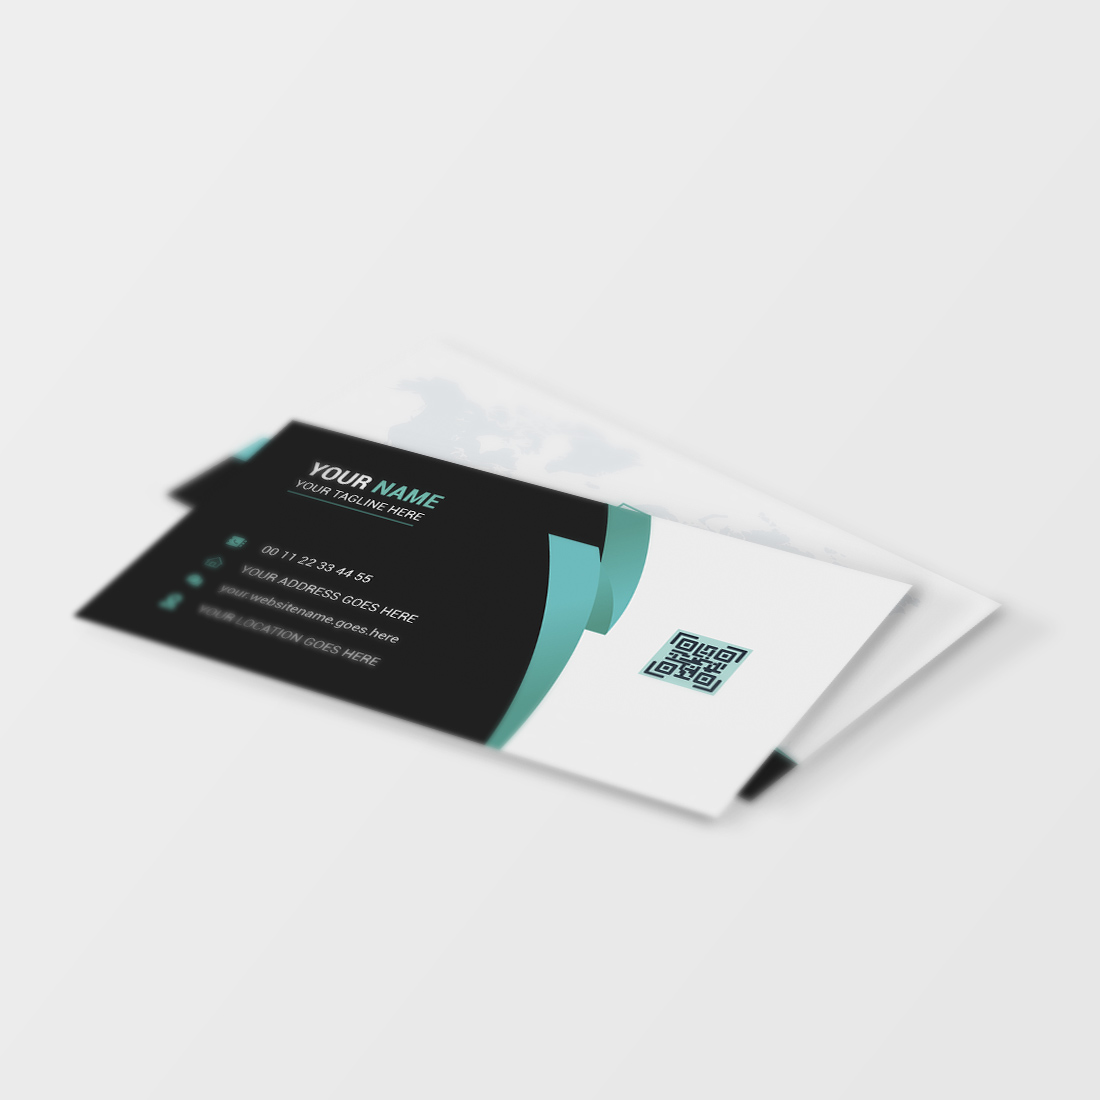 White and black business card on a white surface.